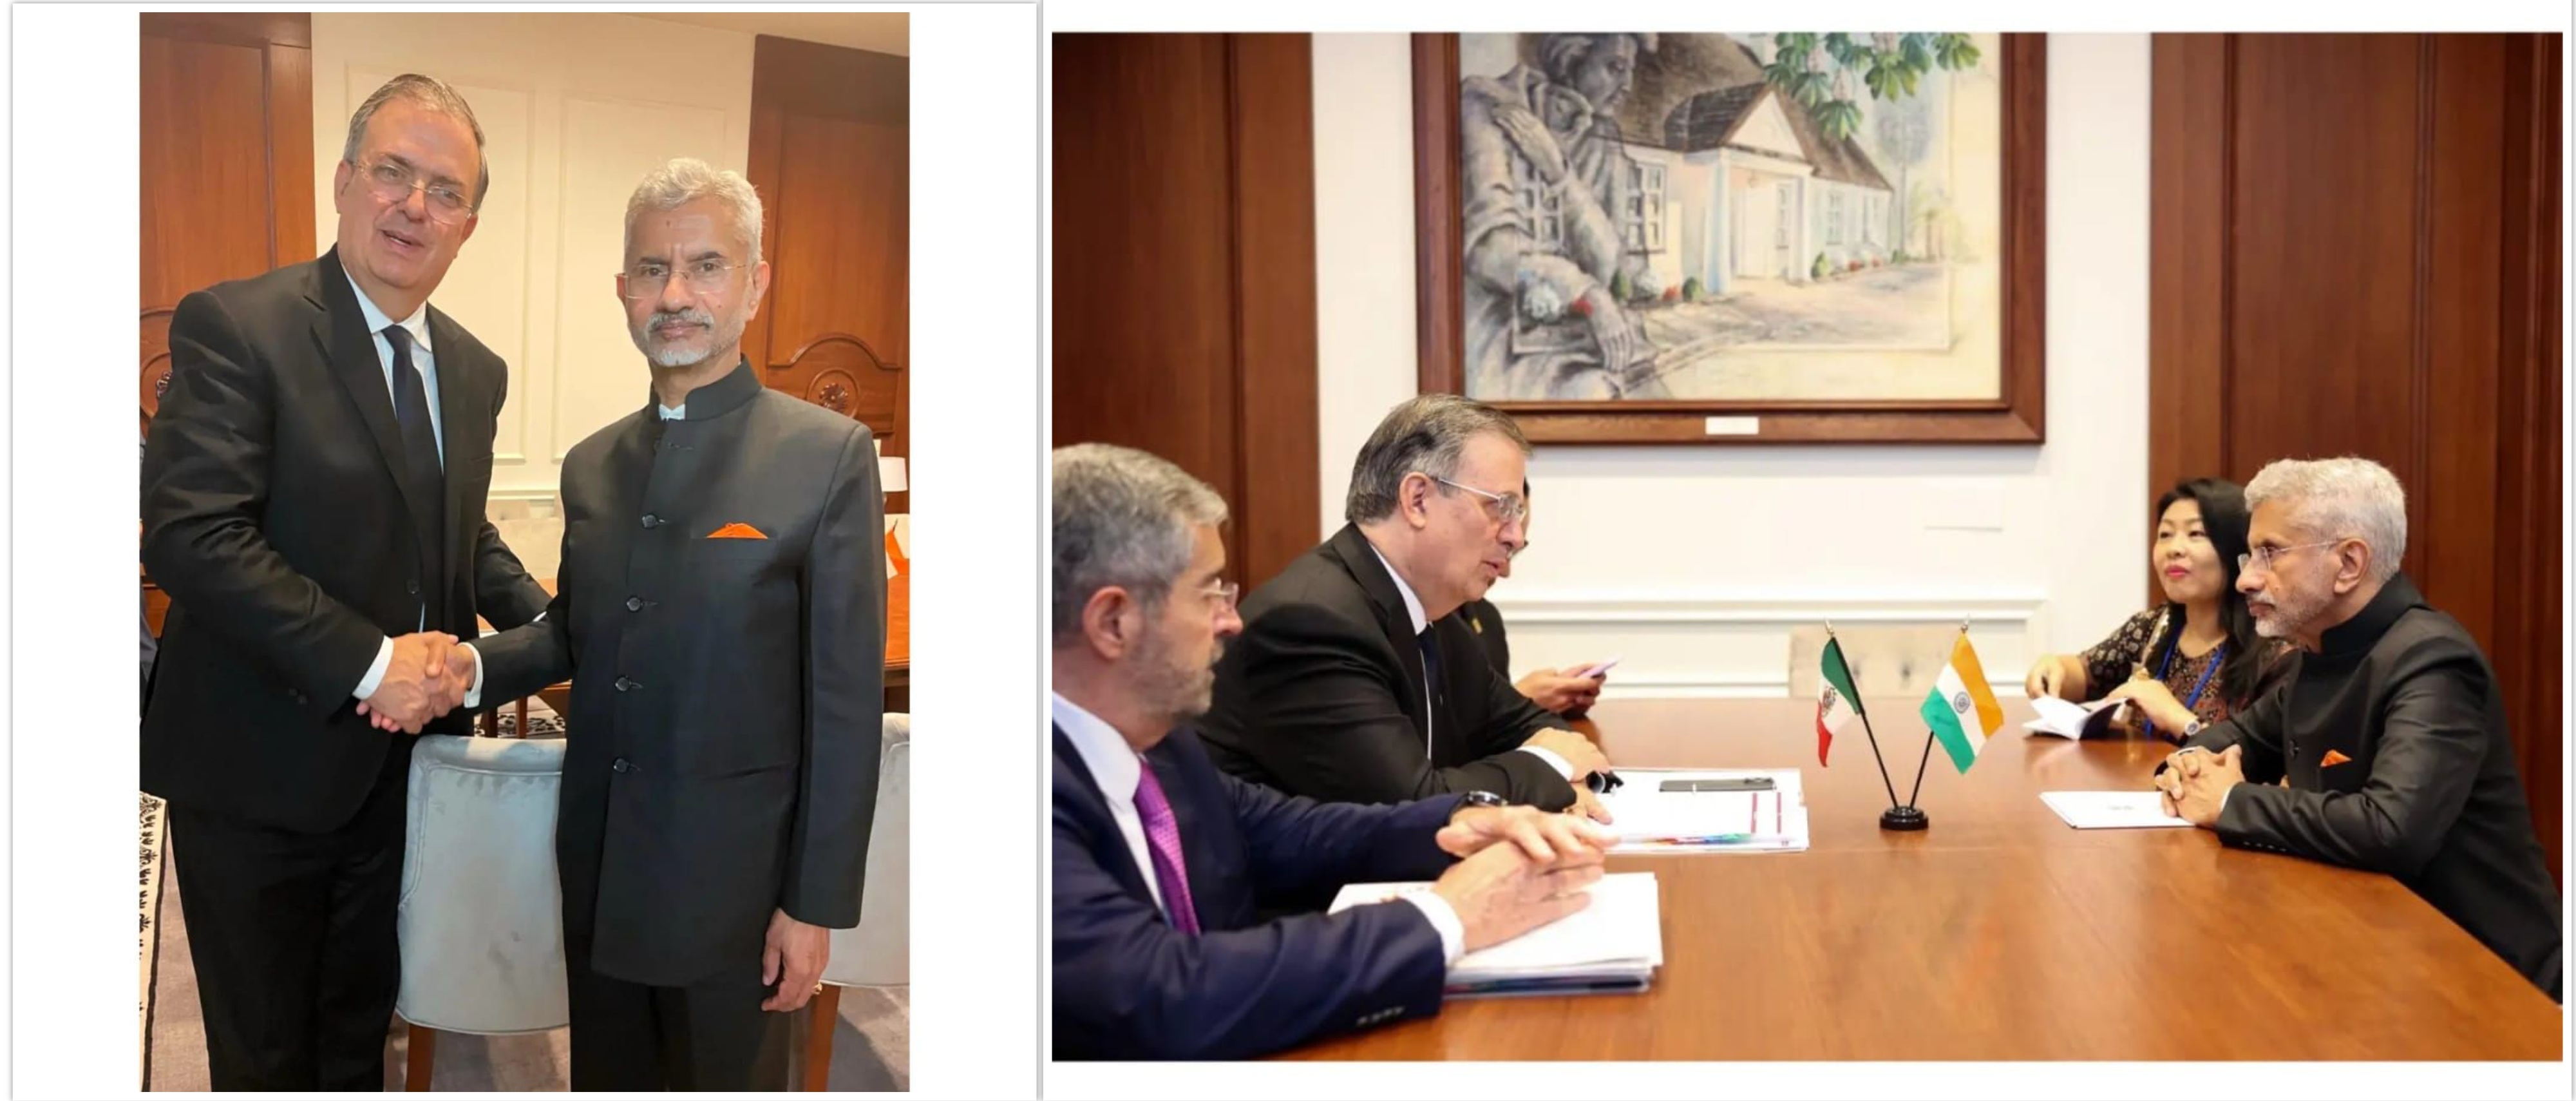  <div style="fcolor: #fff; font-weight: 600; font-size: 1.5em;">
<p style="font-size: 13.8px;">Hon'ble External Affairs Minister of India Dr S. Jaishankar had a productive meeting with Hon'ble Foreign Minister of Mexico H.E Mr. Marcelo Ebrard on the sidelines of UNGA.

Discussion focussed upon various issues including Ukraine conflict, pharmaceuticals production and India's upcoming Presidency of G-20. 
<br /><span style="text-align: center;">22 September 2022</span></p>
</div>